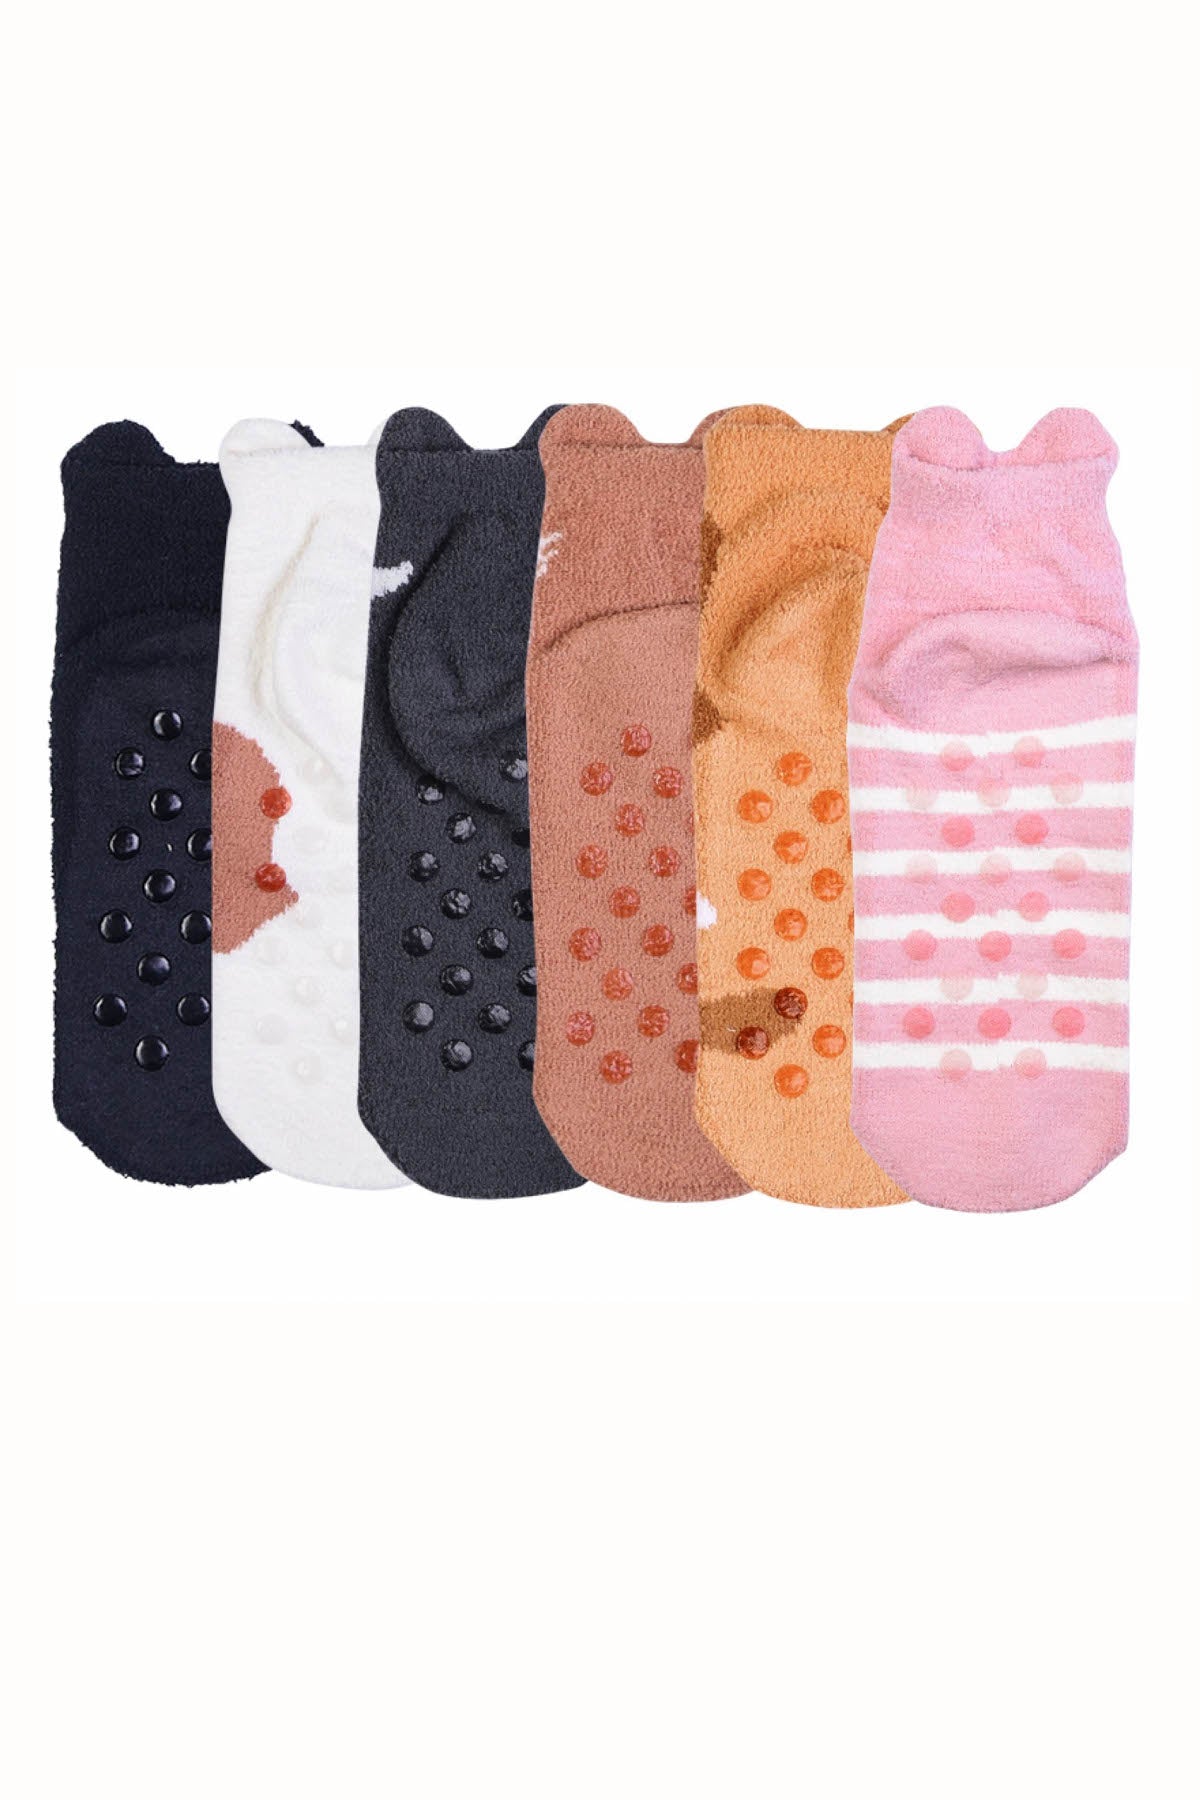 Sofra Apricot Kitty Cozy Picot Ankle Socks with Grippers